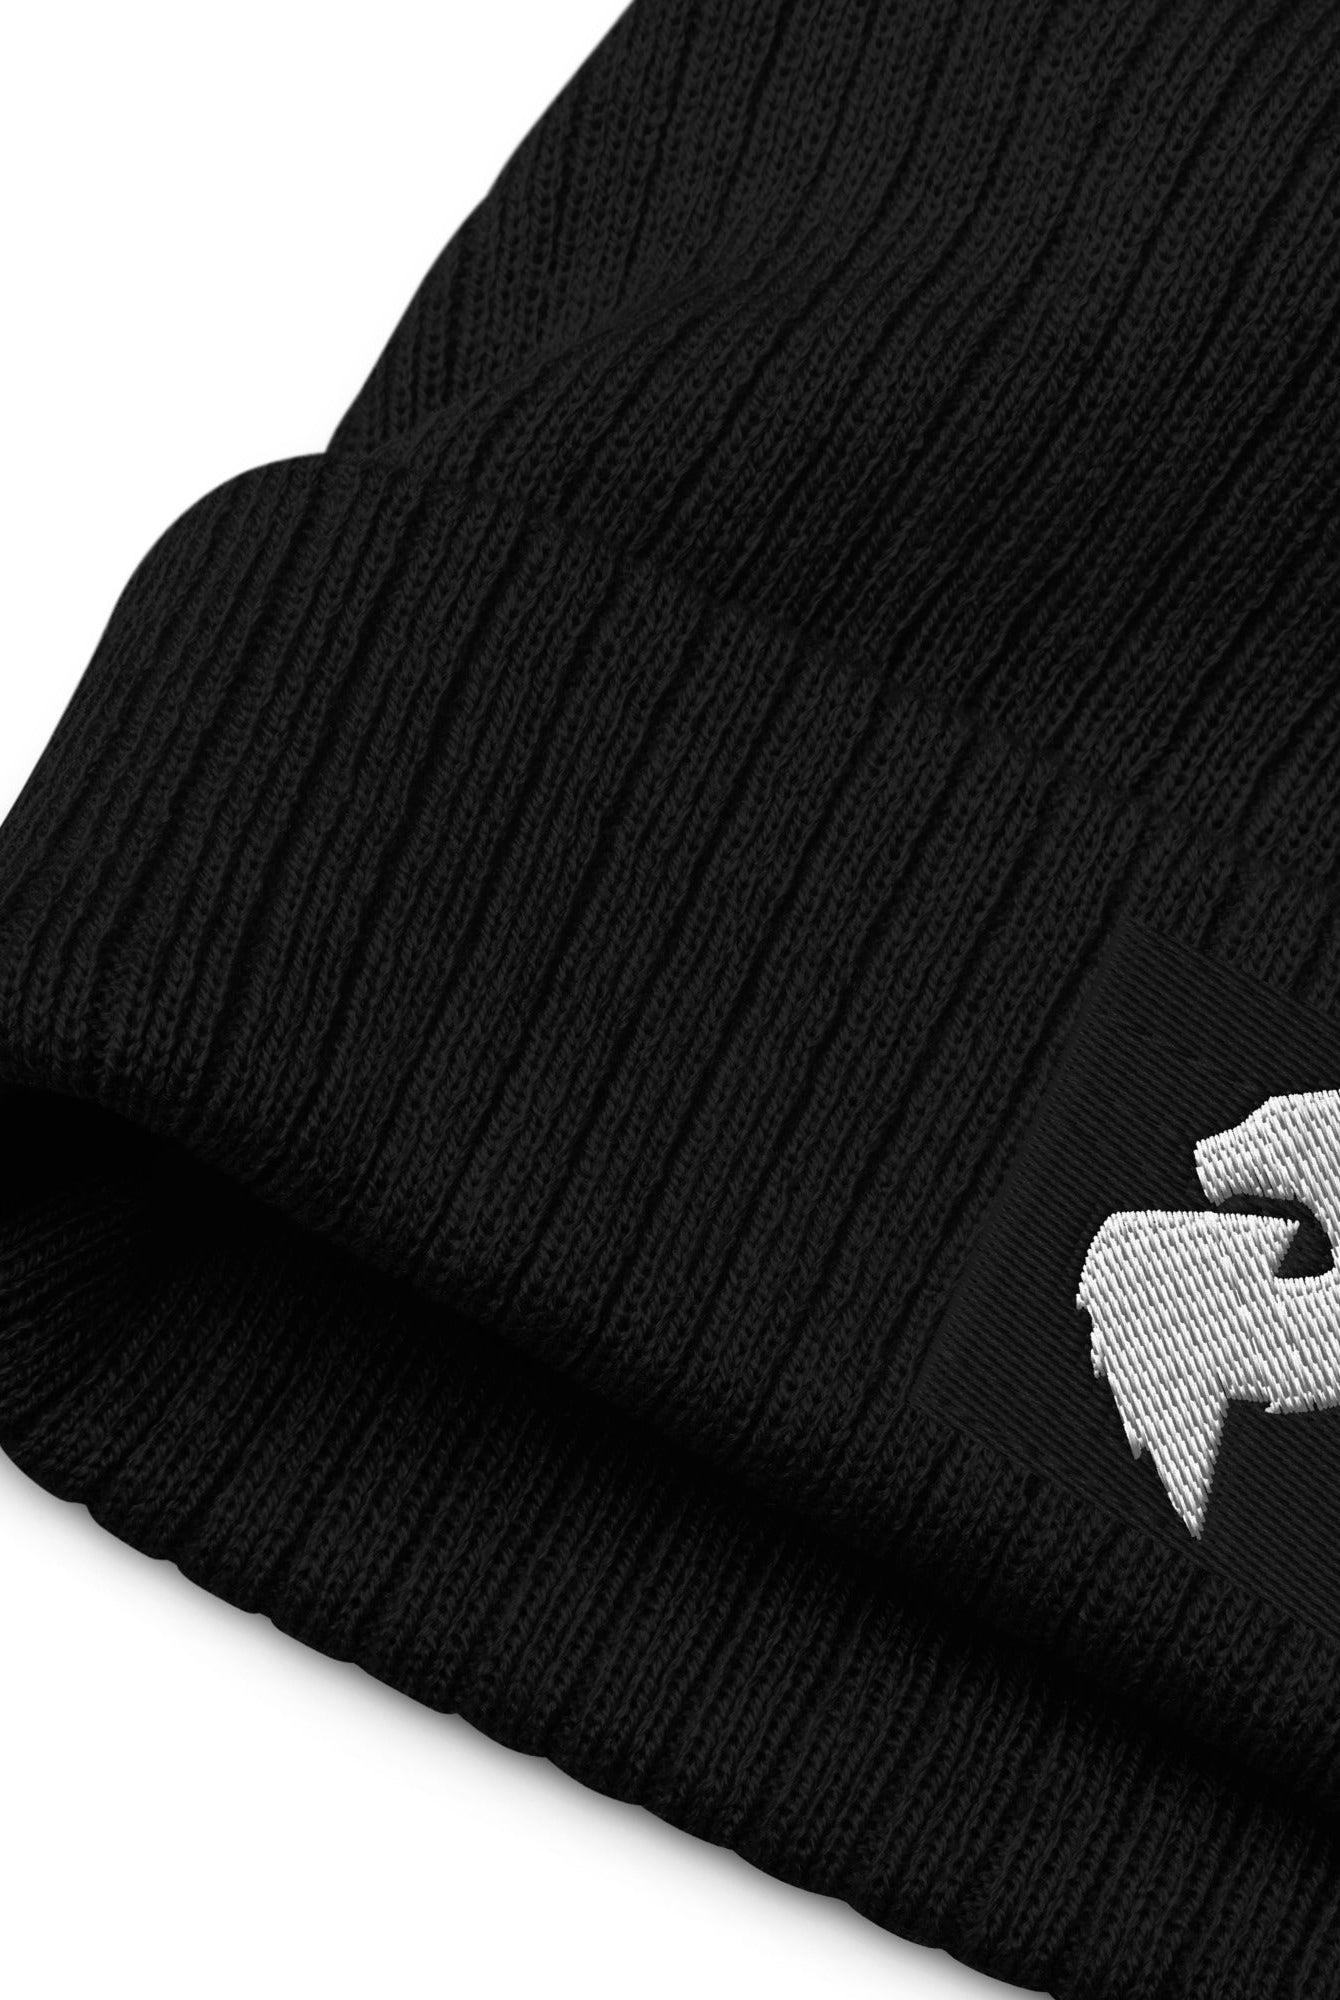 His or Hers Dragon Foxx™ Eco - Ribbed knit beanie - His or Hers Dragon Foxx™ Eco - Ribbed knit beanie - DRAGON FOXX™ - His or Hers Dragon Foxx™ Eco - Ribbed knit beanie - 2867494_13238 - Black - - Accessories - Acid Green Eco - Ribbed knit beanie - Beanie